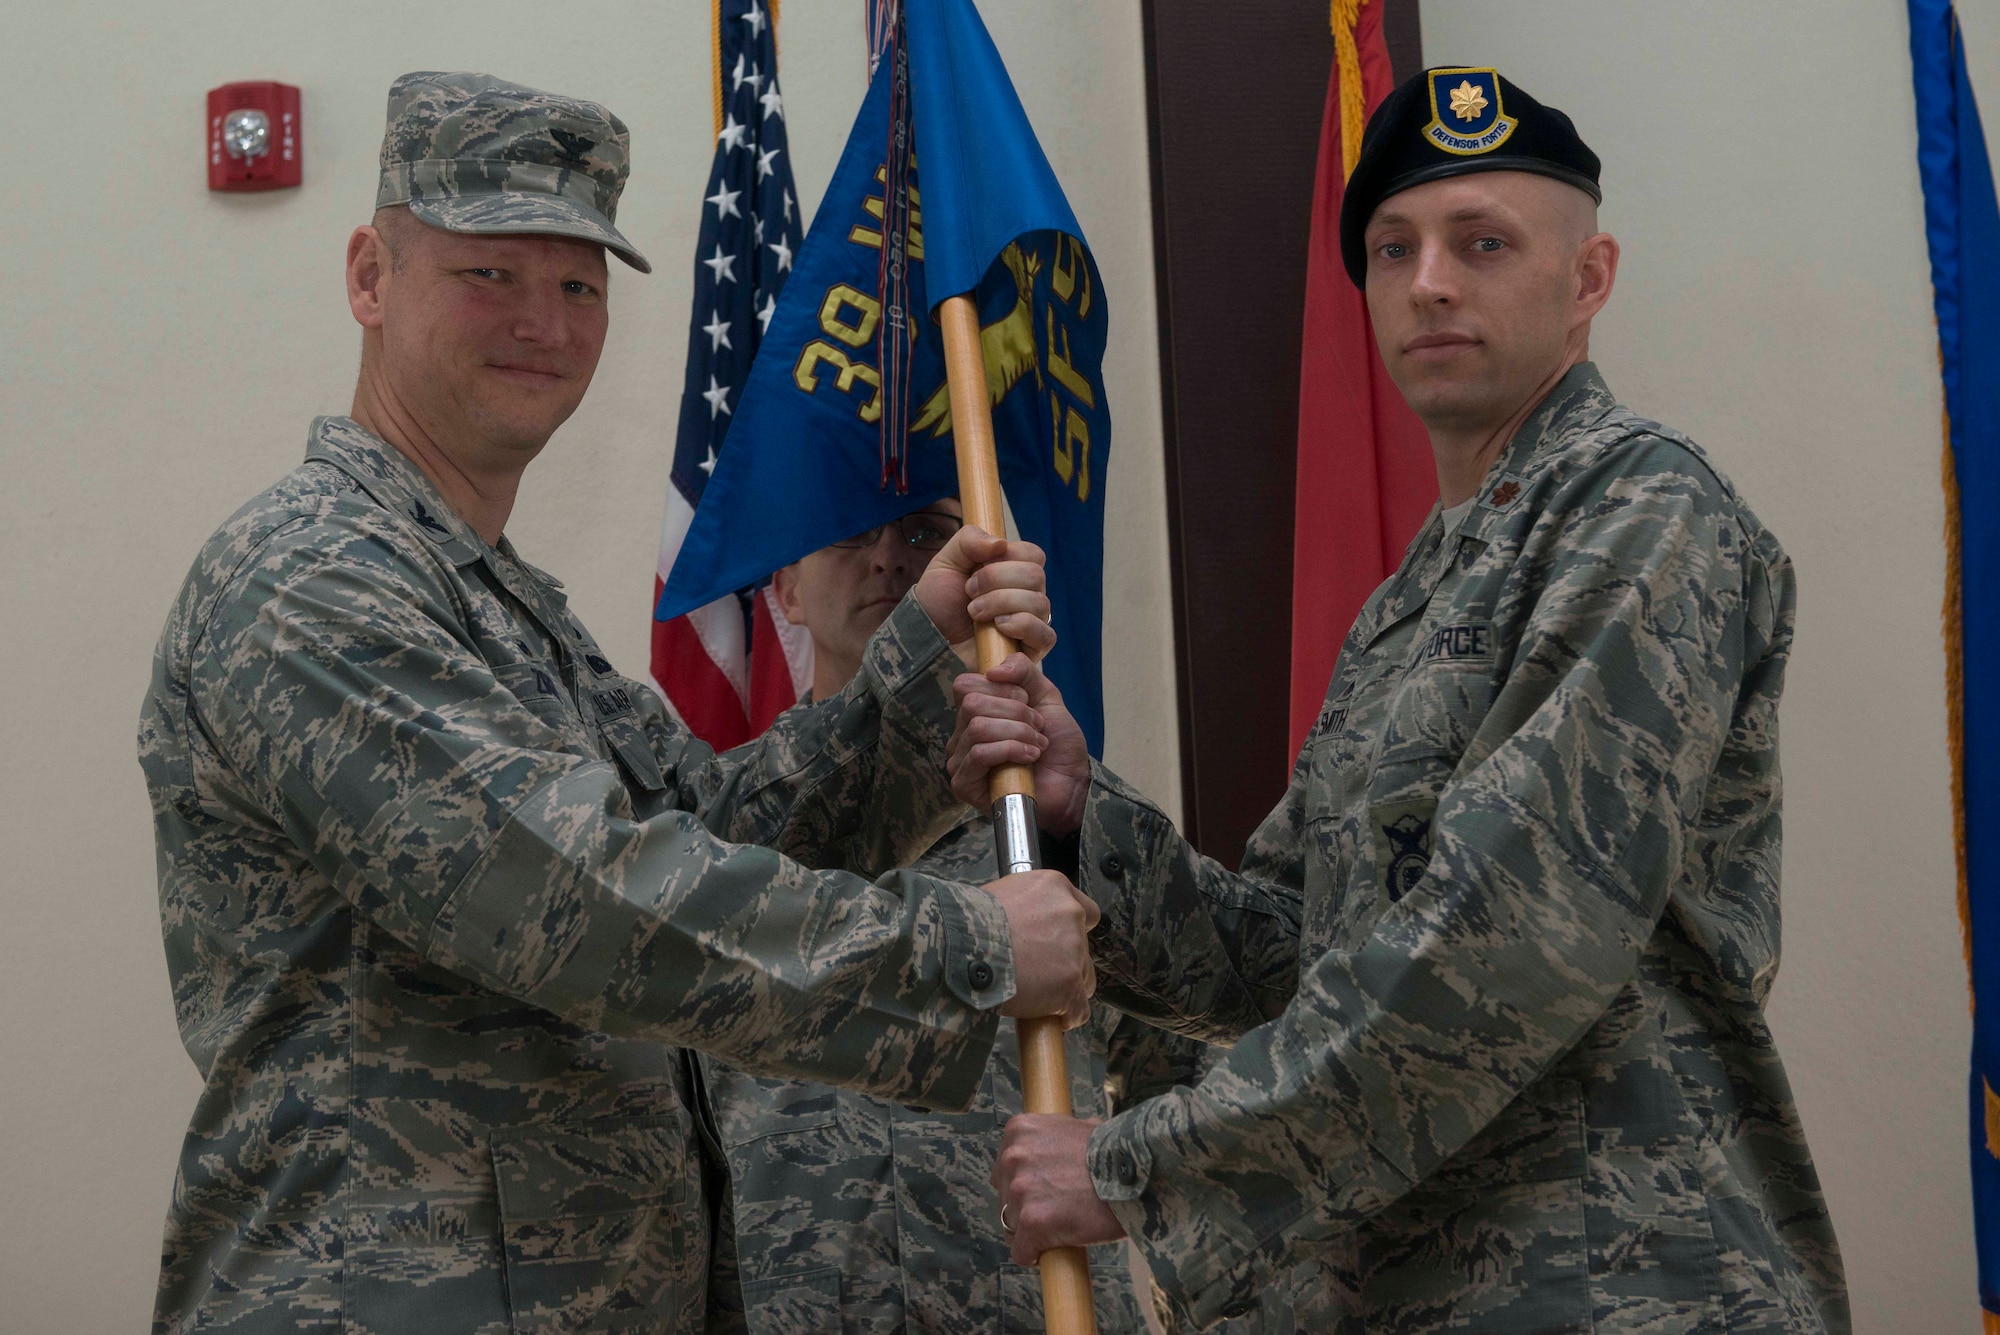 U.S. Air Force Maj. William Smith, 39th Security Forces Squadron incoming commander, receives command from U.S. Air Force Col. James, Zirkel, 39th Weapons System Security Group commander, June 24, 2016, at Incirlik Air Base, Turkey. Prior to taking command, Smith attended the Naval War College in Newport, R.I., where he completed an intermediate level program. (U.S. Air Force photo by Senior Airman John Nieves Camacho/Released)